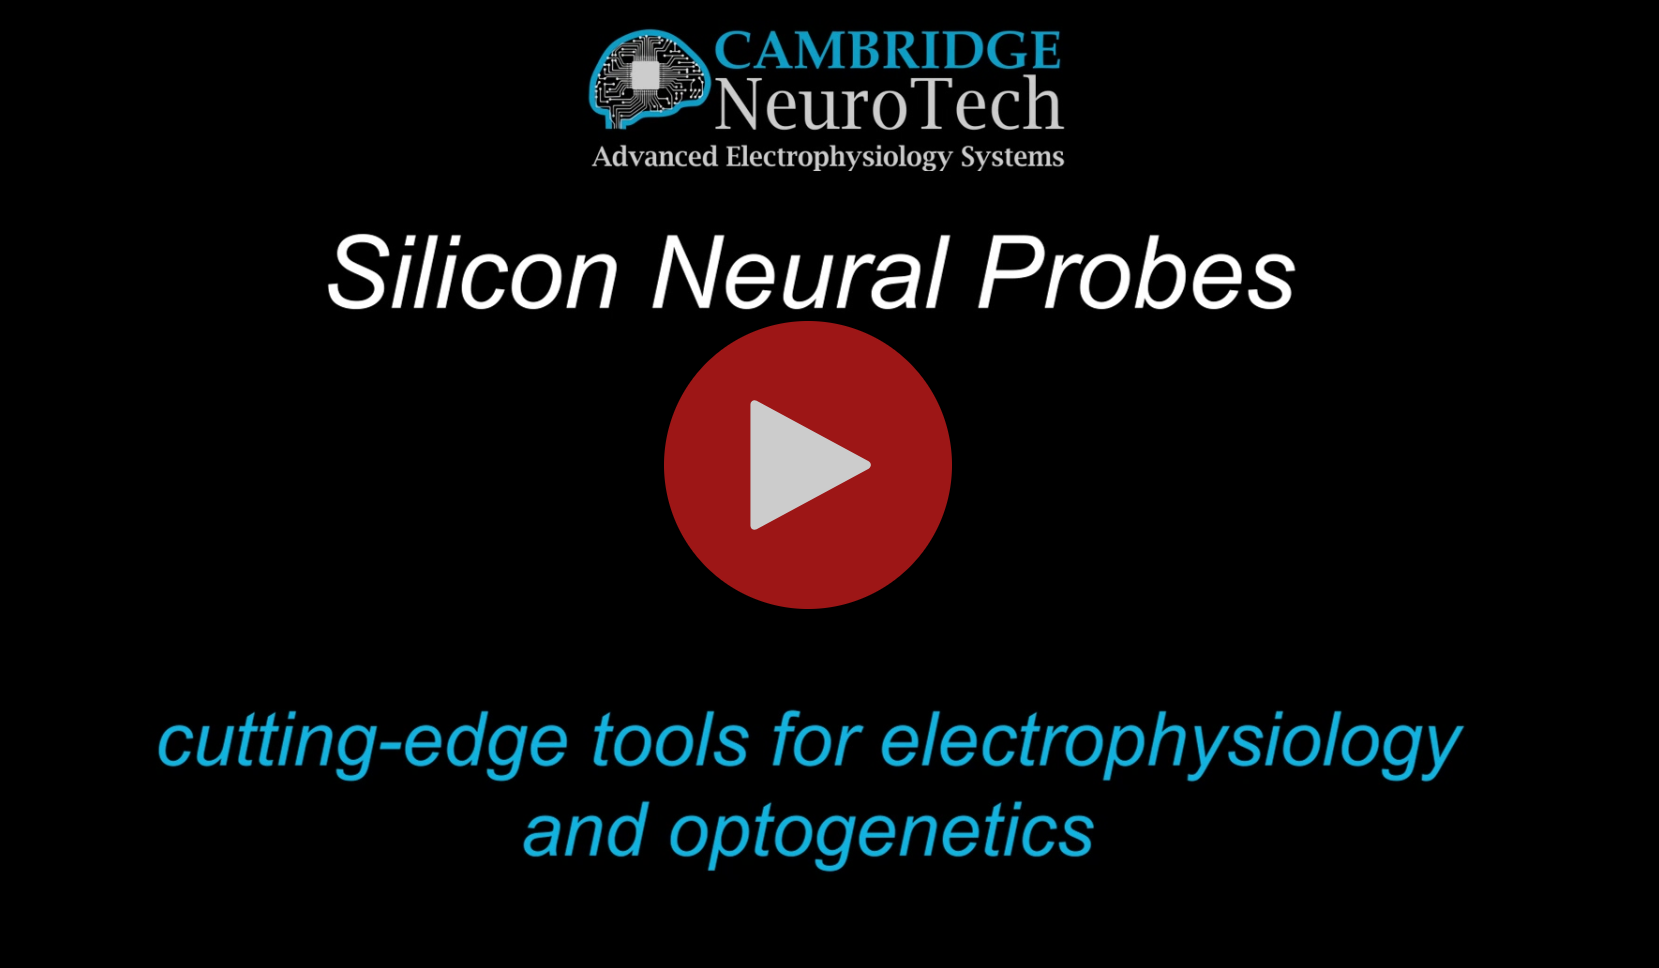 Cambridge NeuroTech Silicon Neural Probes for electrophysiology and optogenetics